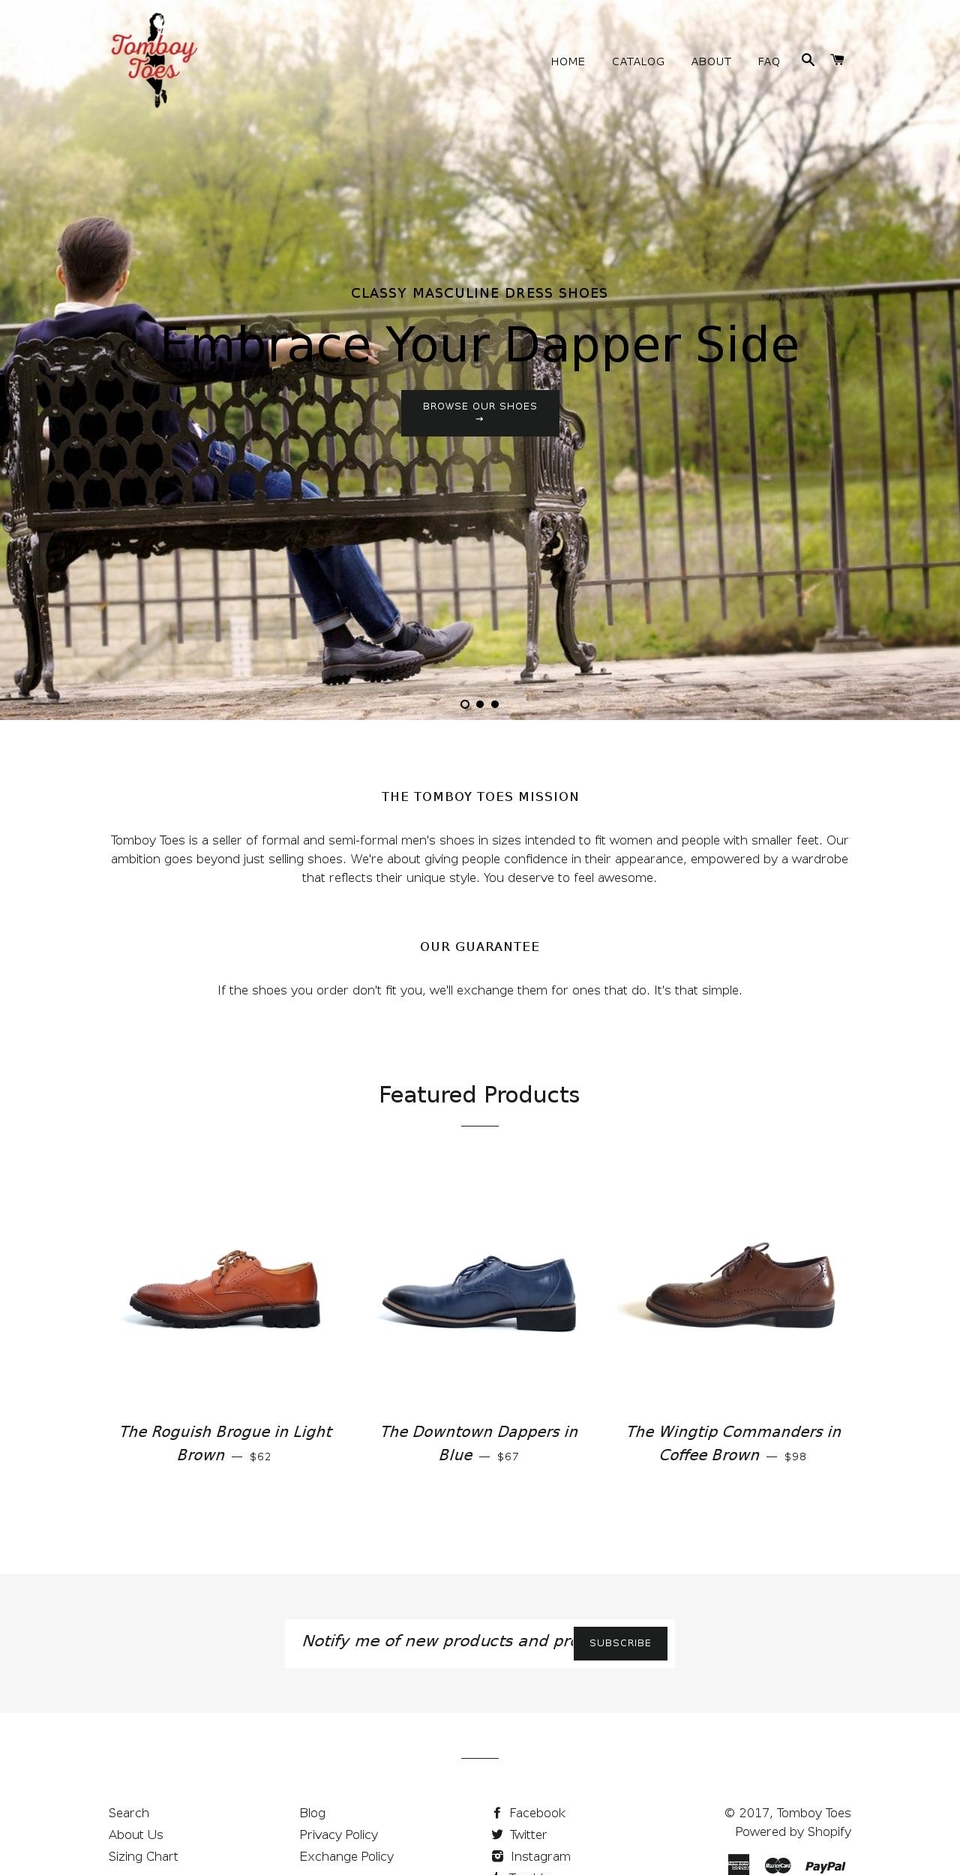 Brooklyn Shopify theme site example tomboytoes.com